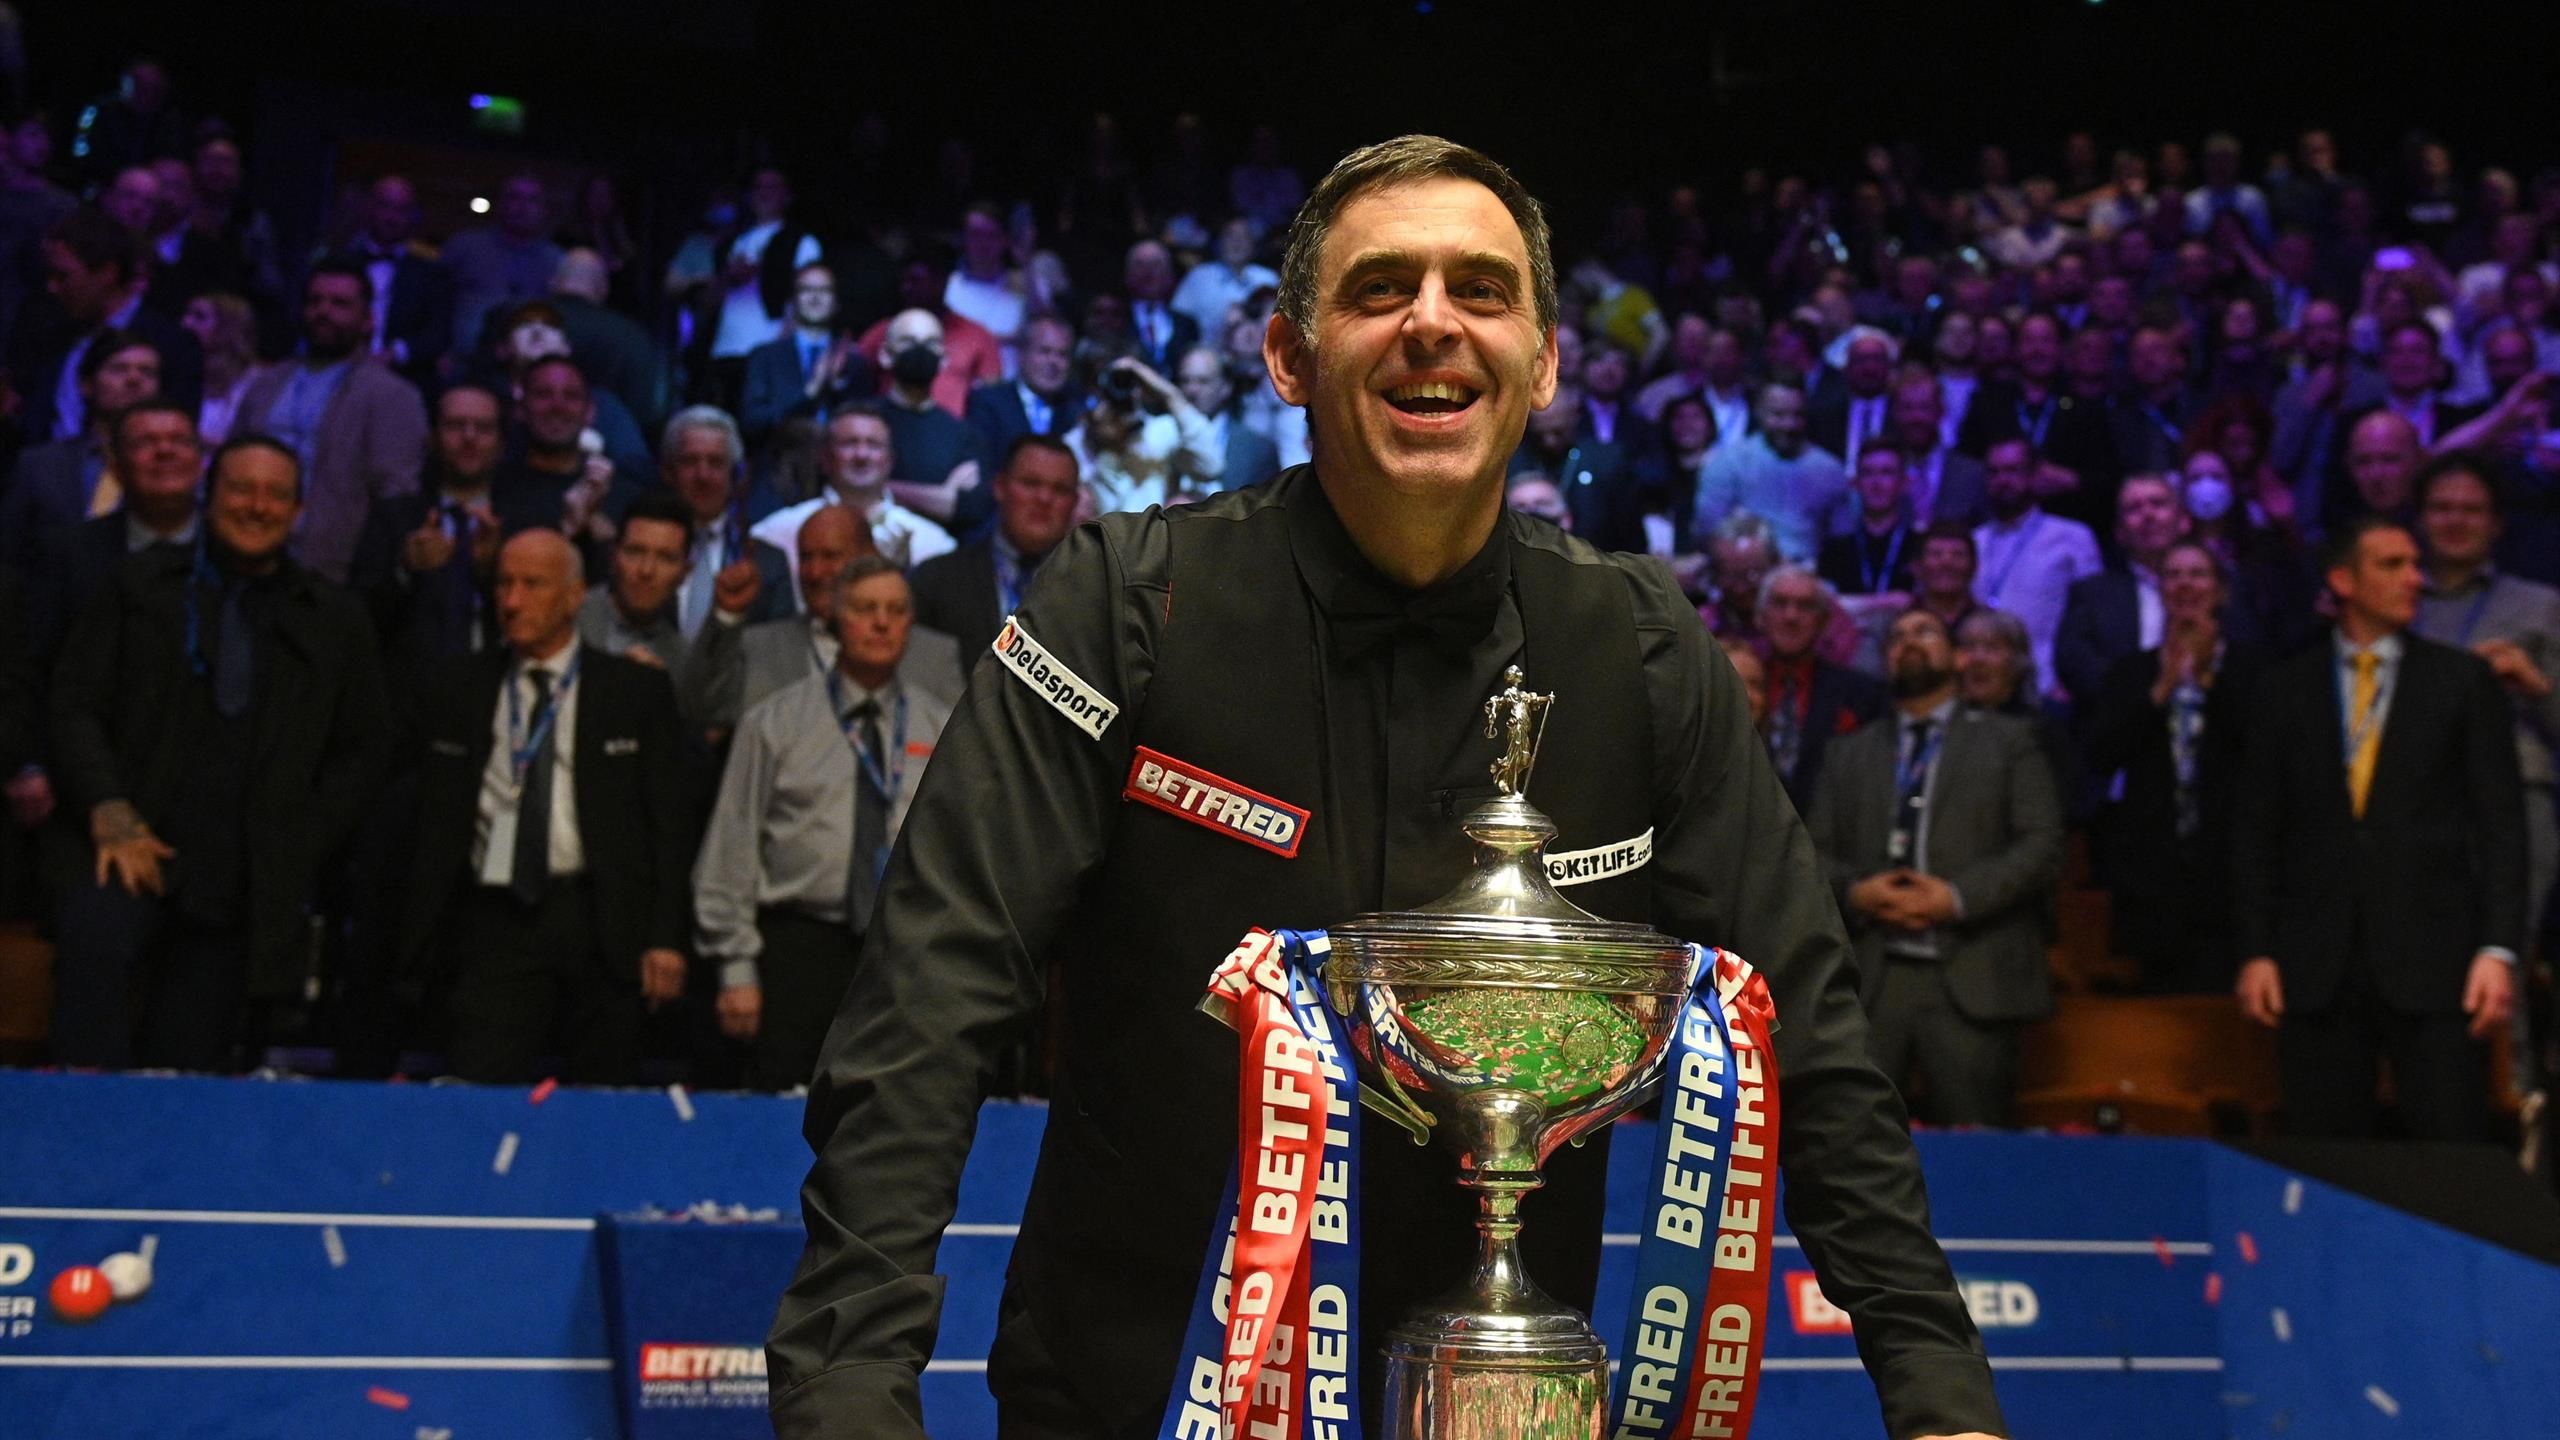 World Snooker Championship 2023 Latest scores, results, schedule, order of play as Ronnie OSullivan eyes eighth title